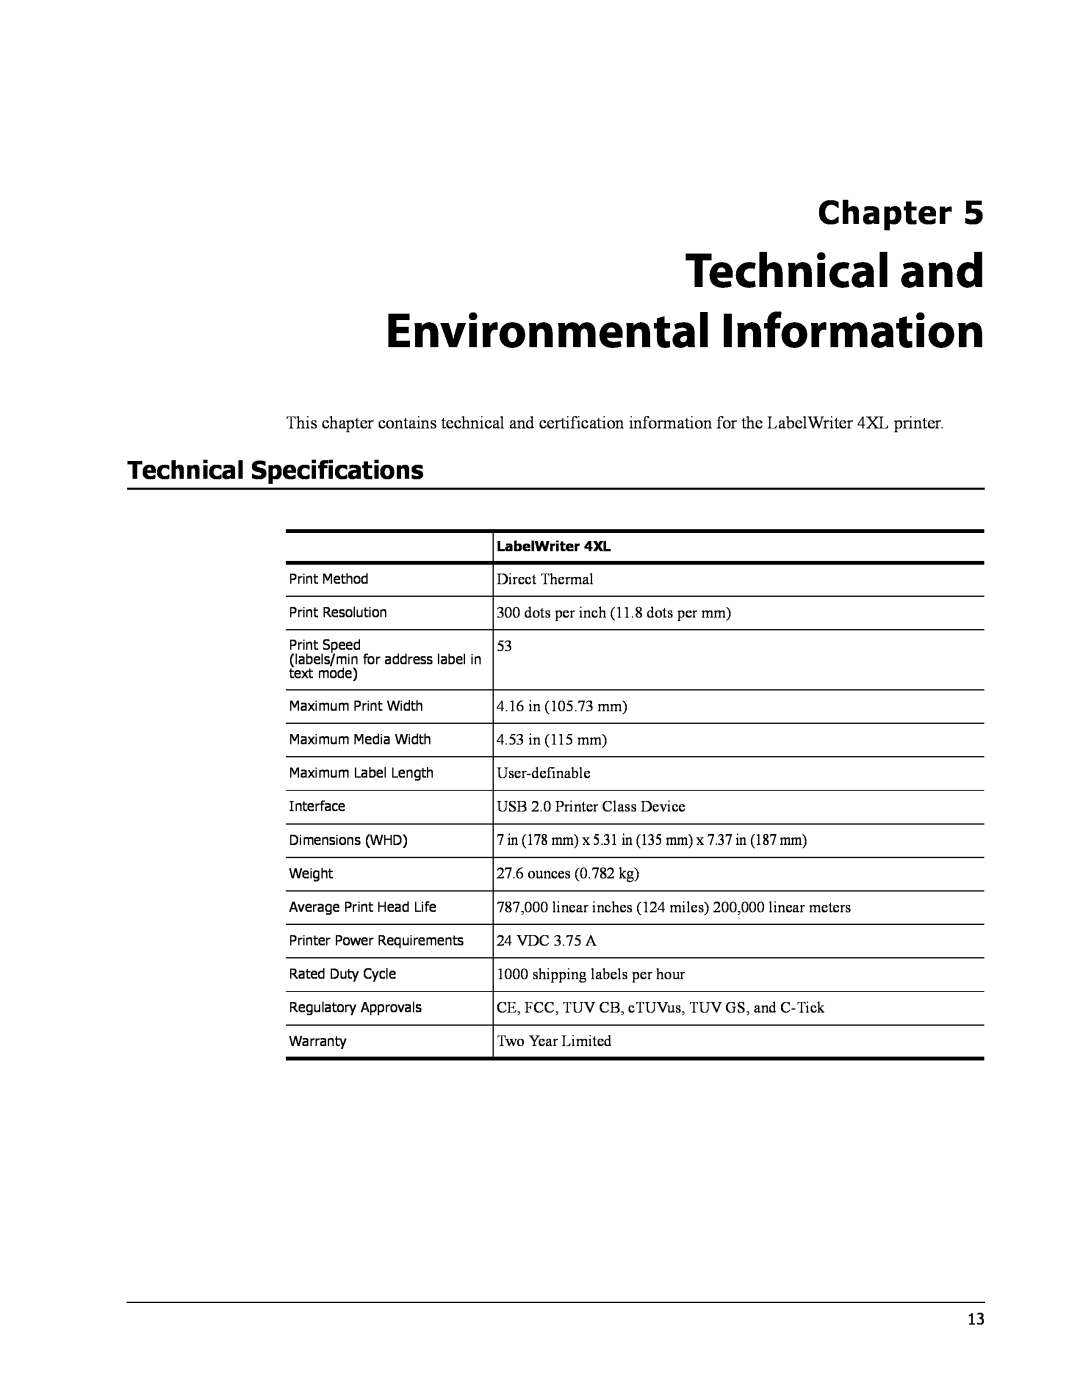 Dymo 4XL manual Technical and Environmental Information, Technical Specifications, Chapter 